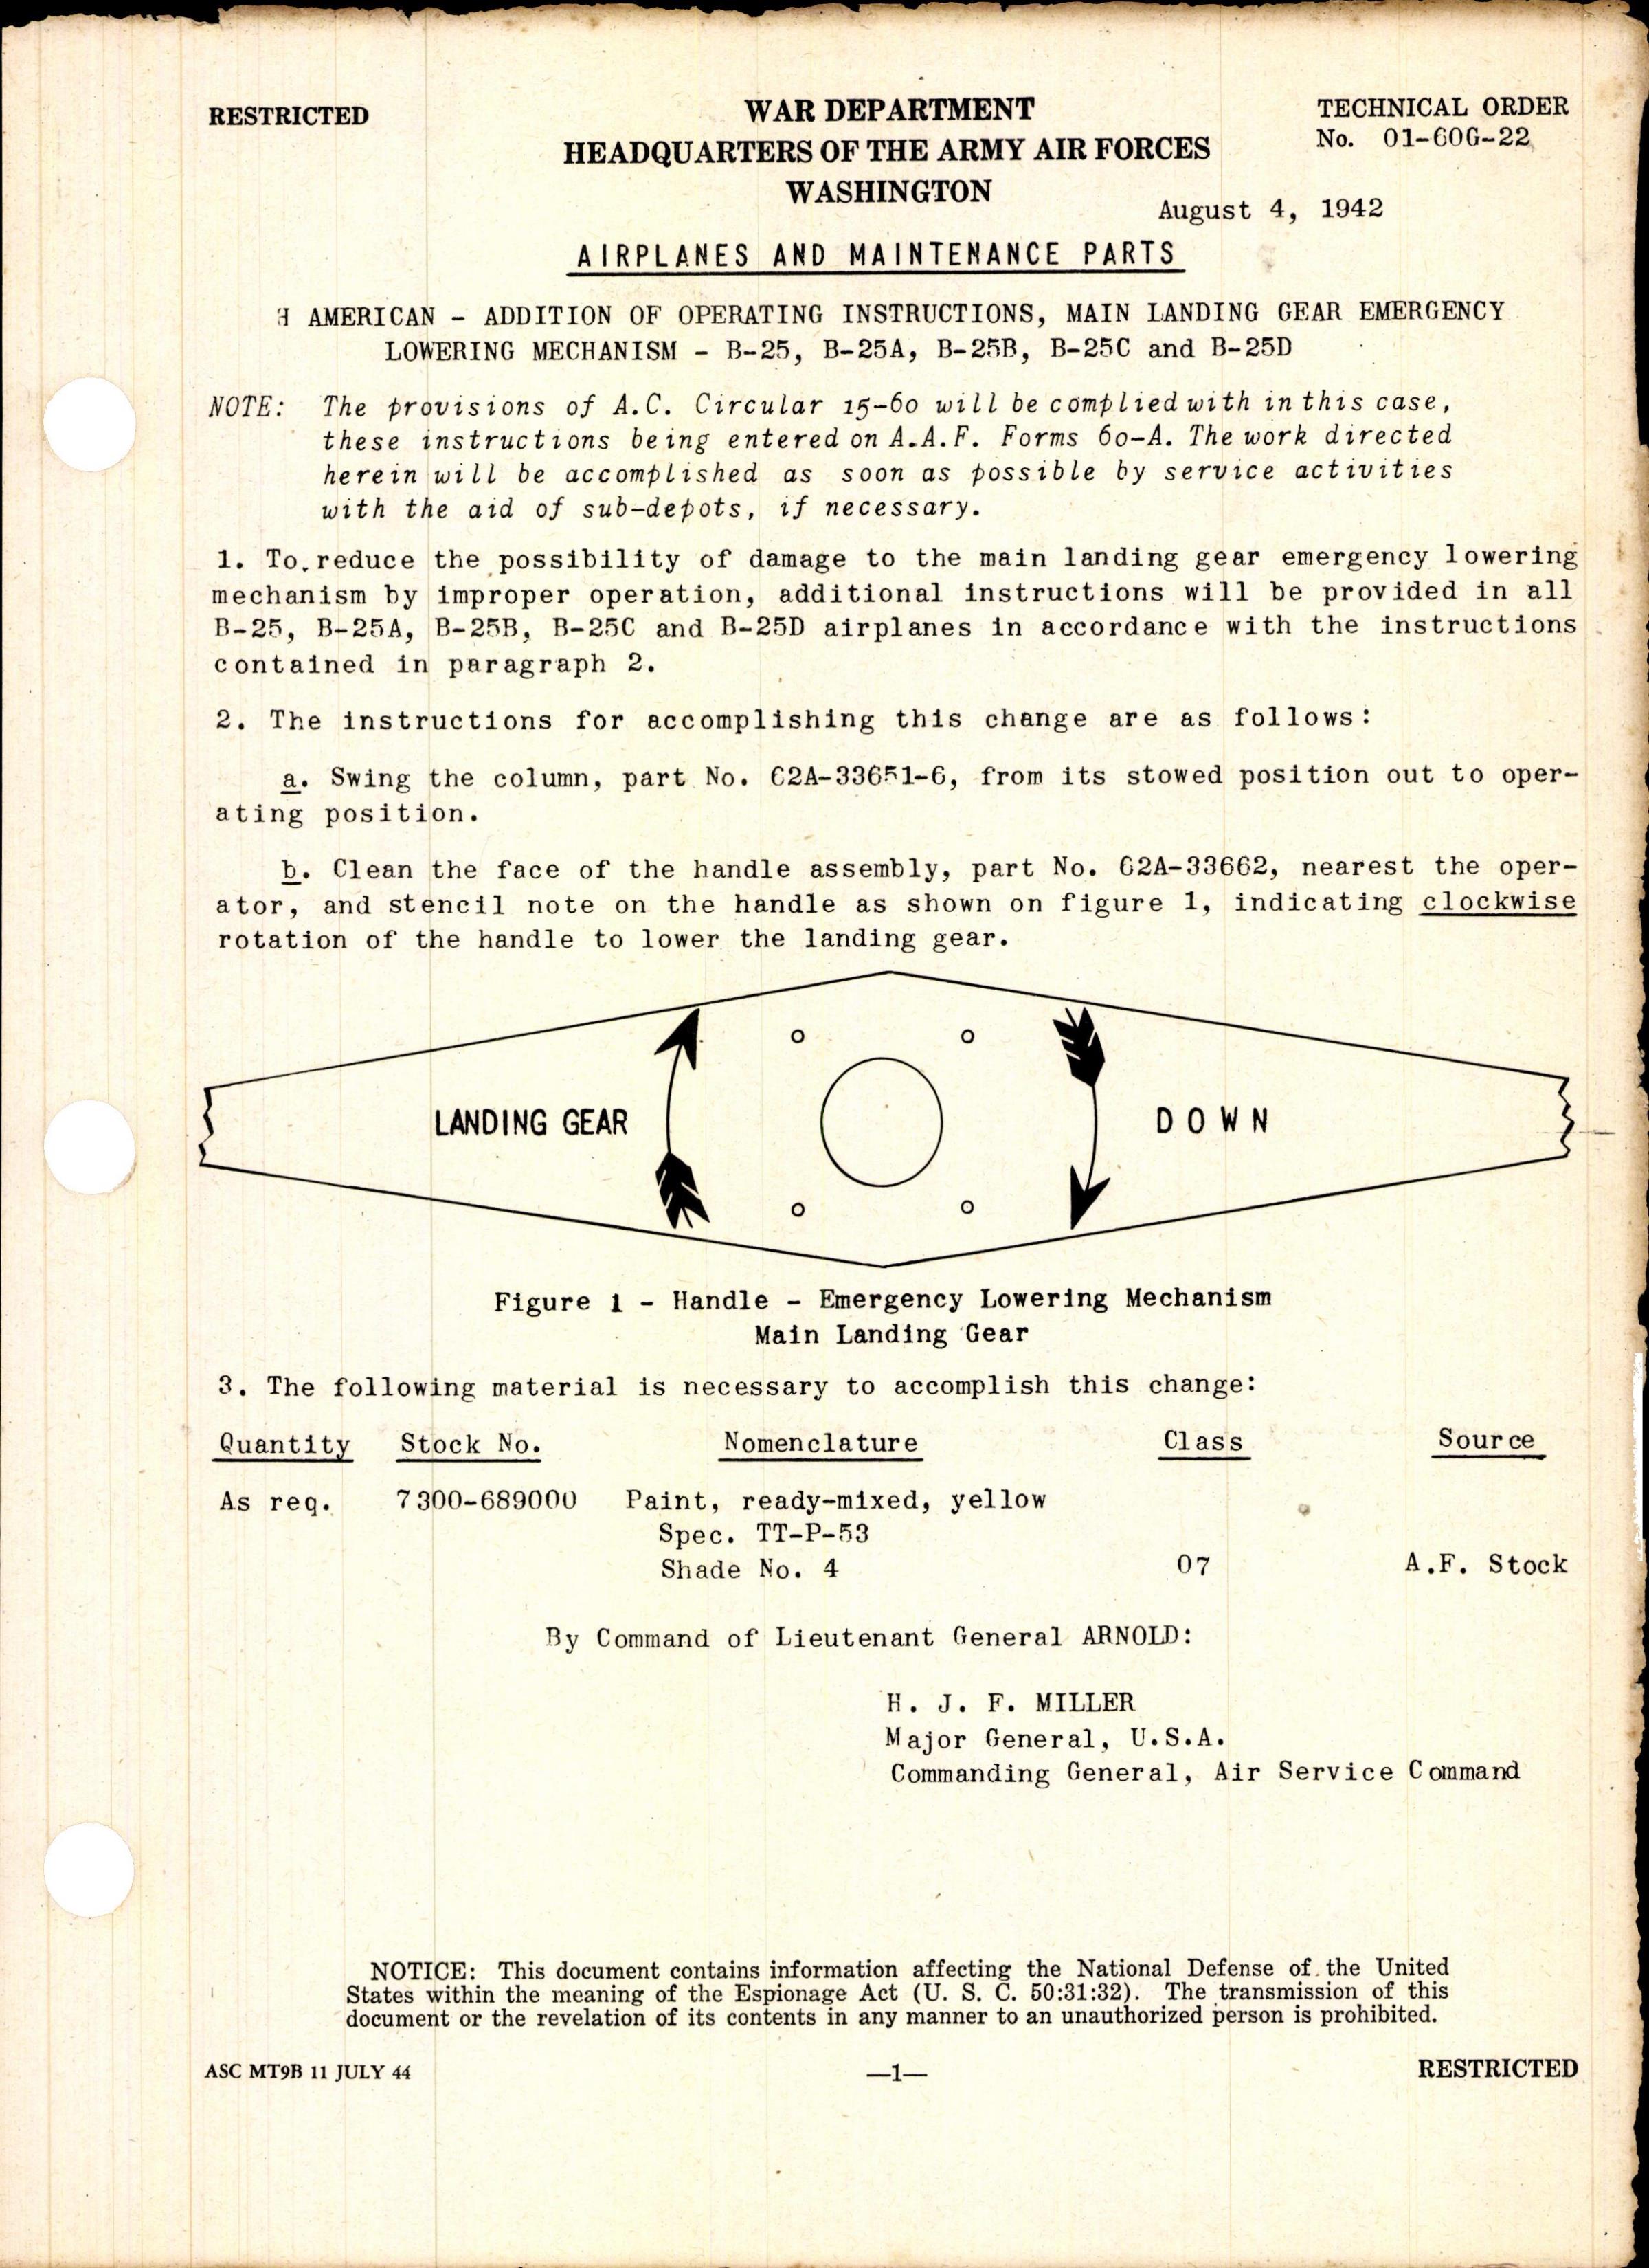 Sample page 1 from AirCorps Library document: Landing Gear Emergency Lowering Mechanism for B-25